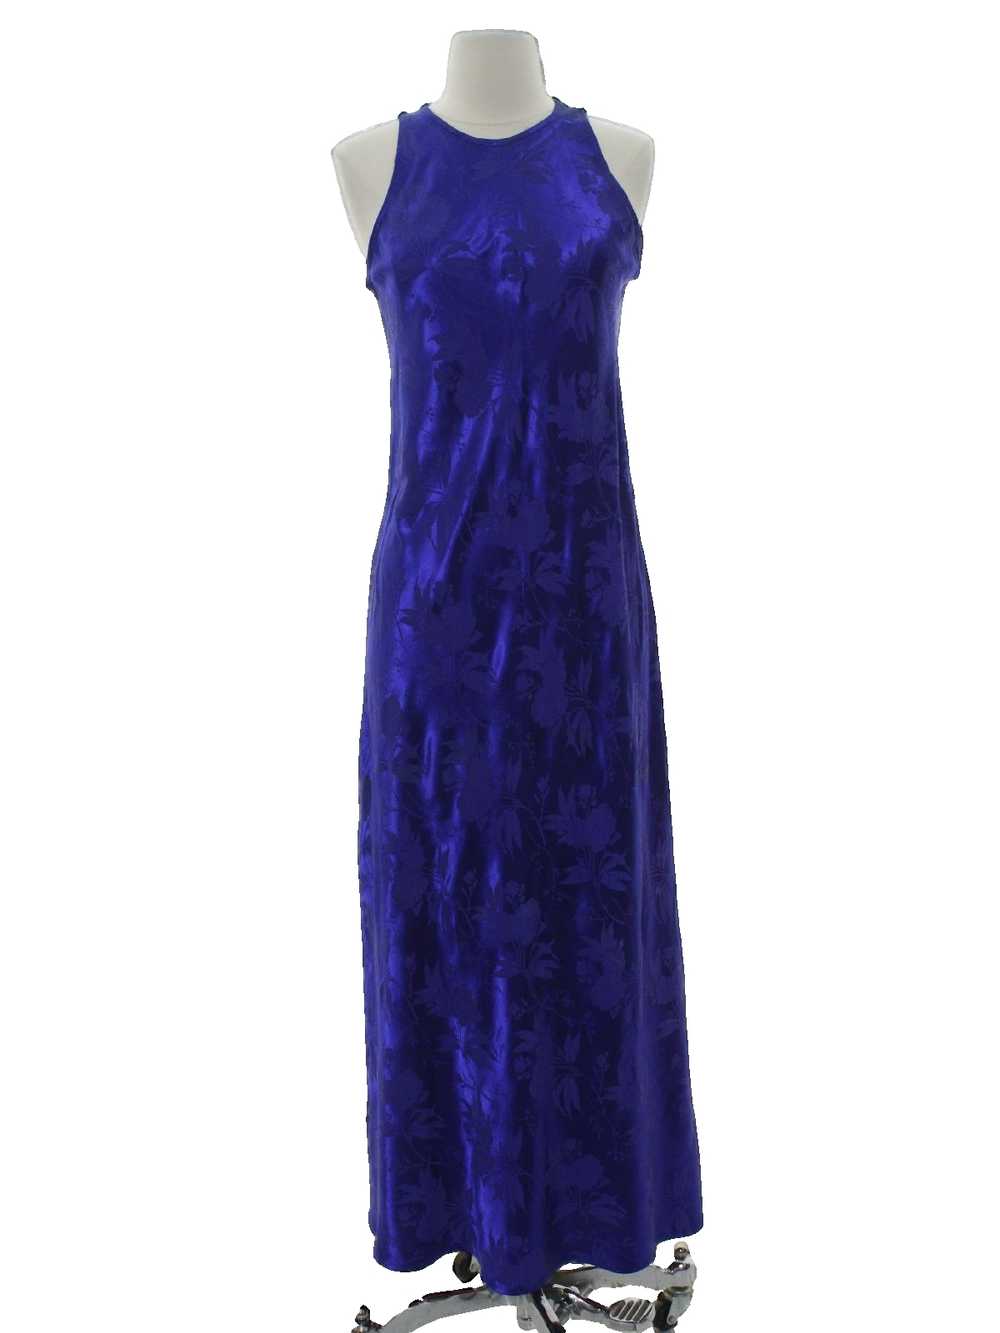 1990's Maurices Prom Or Cocktail Dress - Gem